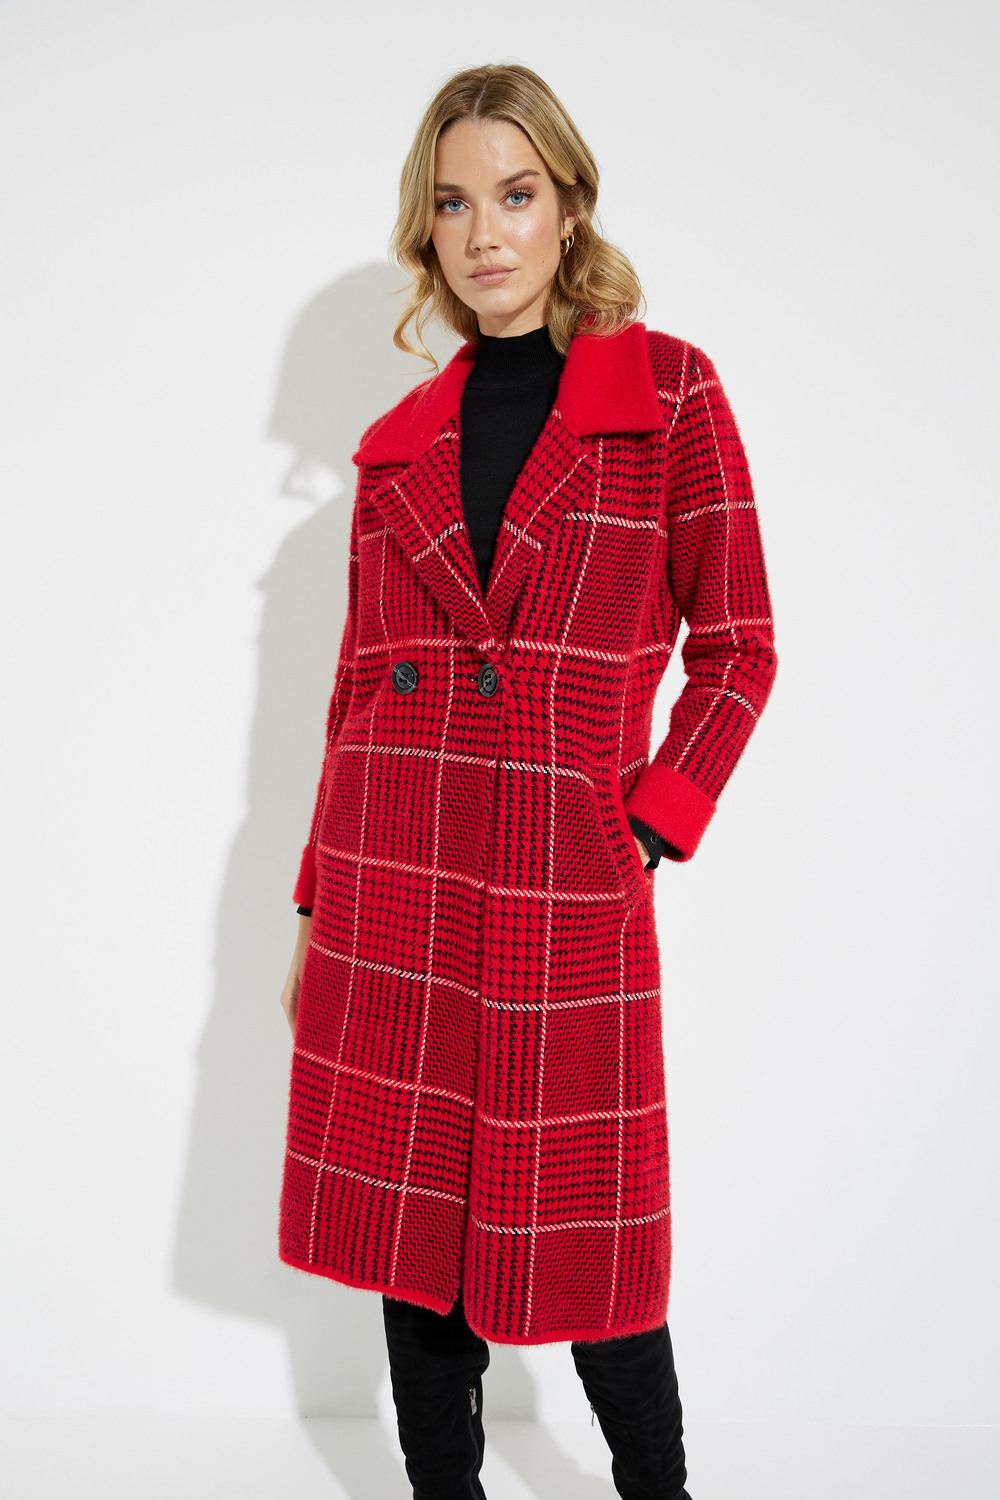 Plaid Print Coat Style A40075. Red